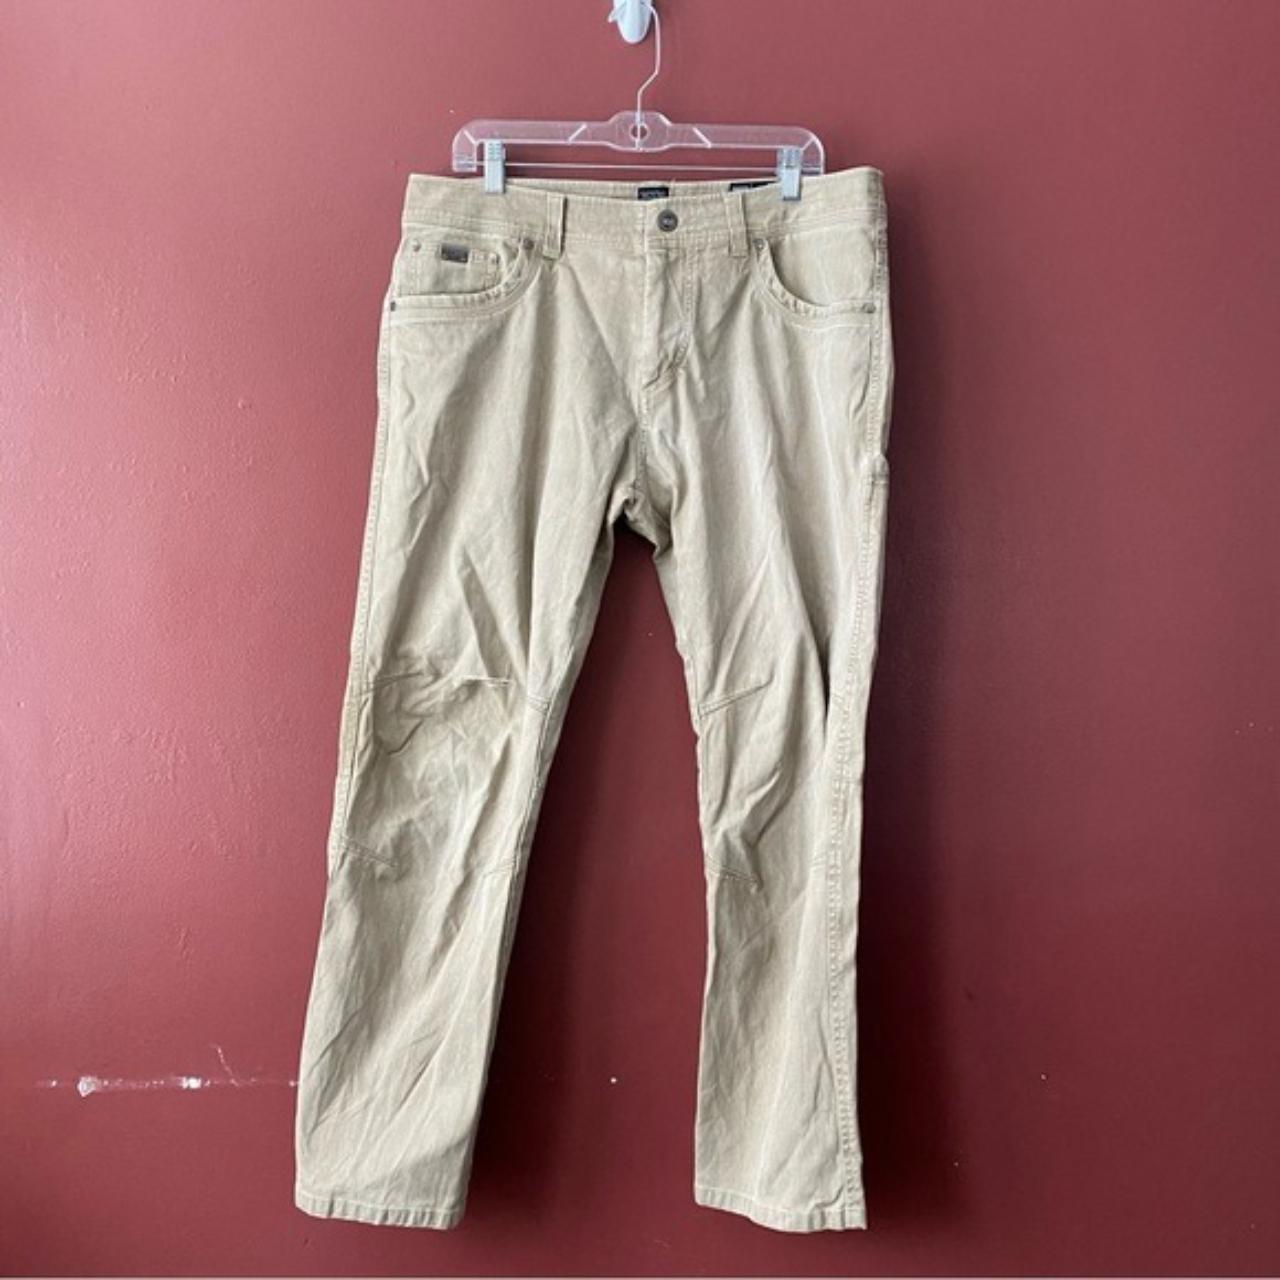 These Kühl cargo hiking pants are great for the - Depop